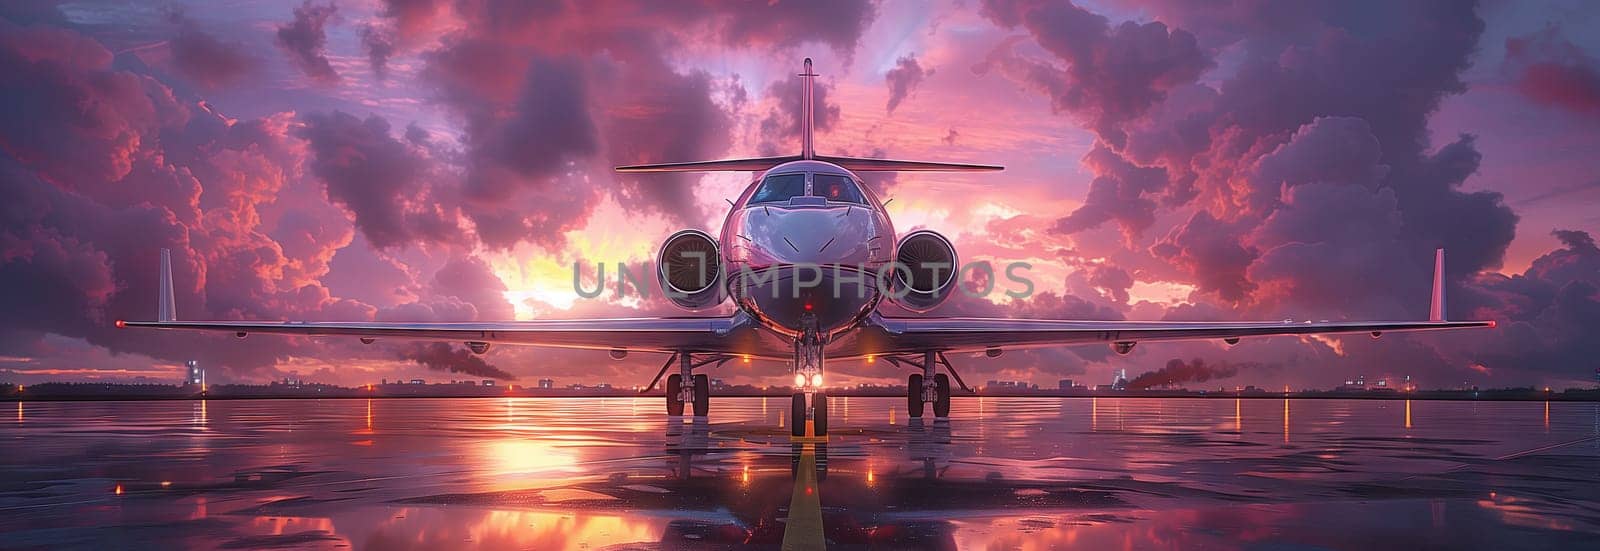 An aircraft is parked on the runway at sunset, surrounded by a purple sky with magenta clouds. The automotive lighting illuminates the landscape, creating a picturesque scene